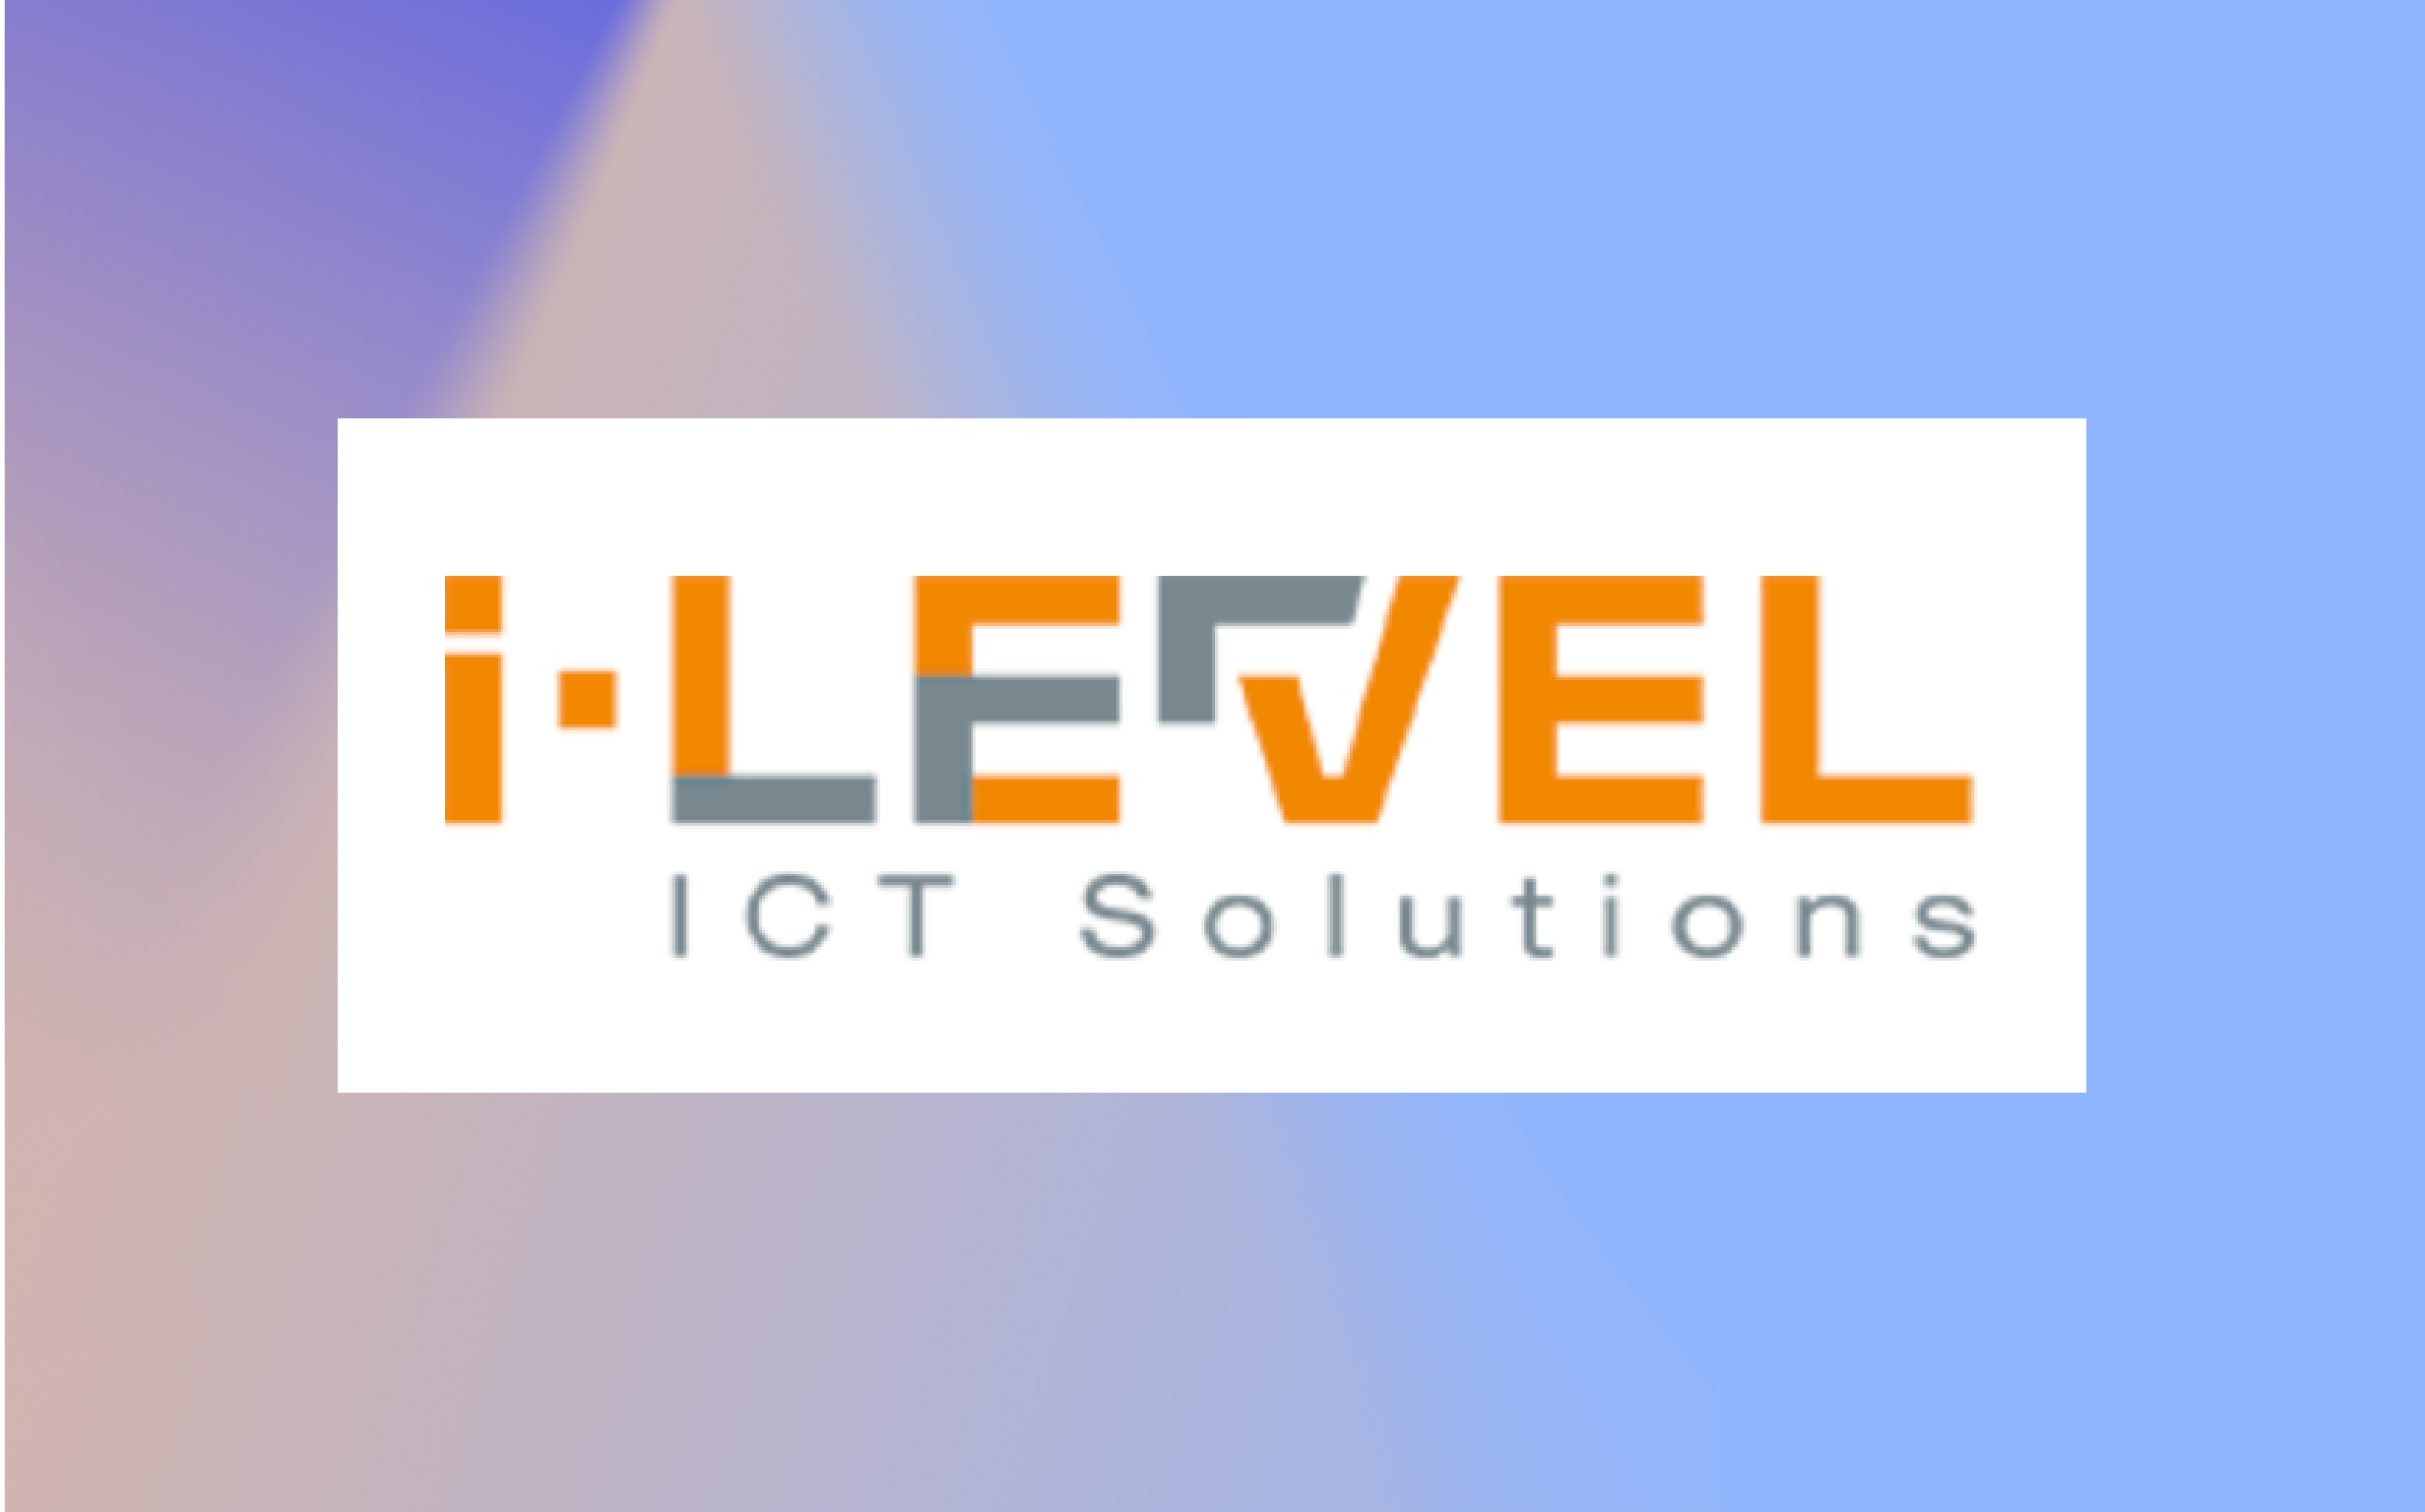 i-LEVEL Builds on Exceptional Customer Service with LogicMonitor